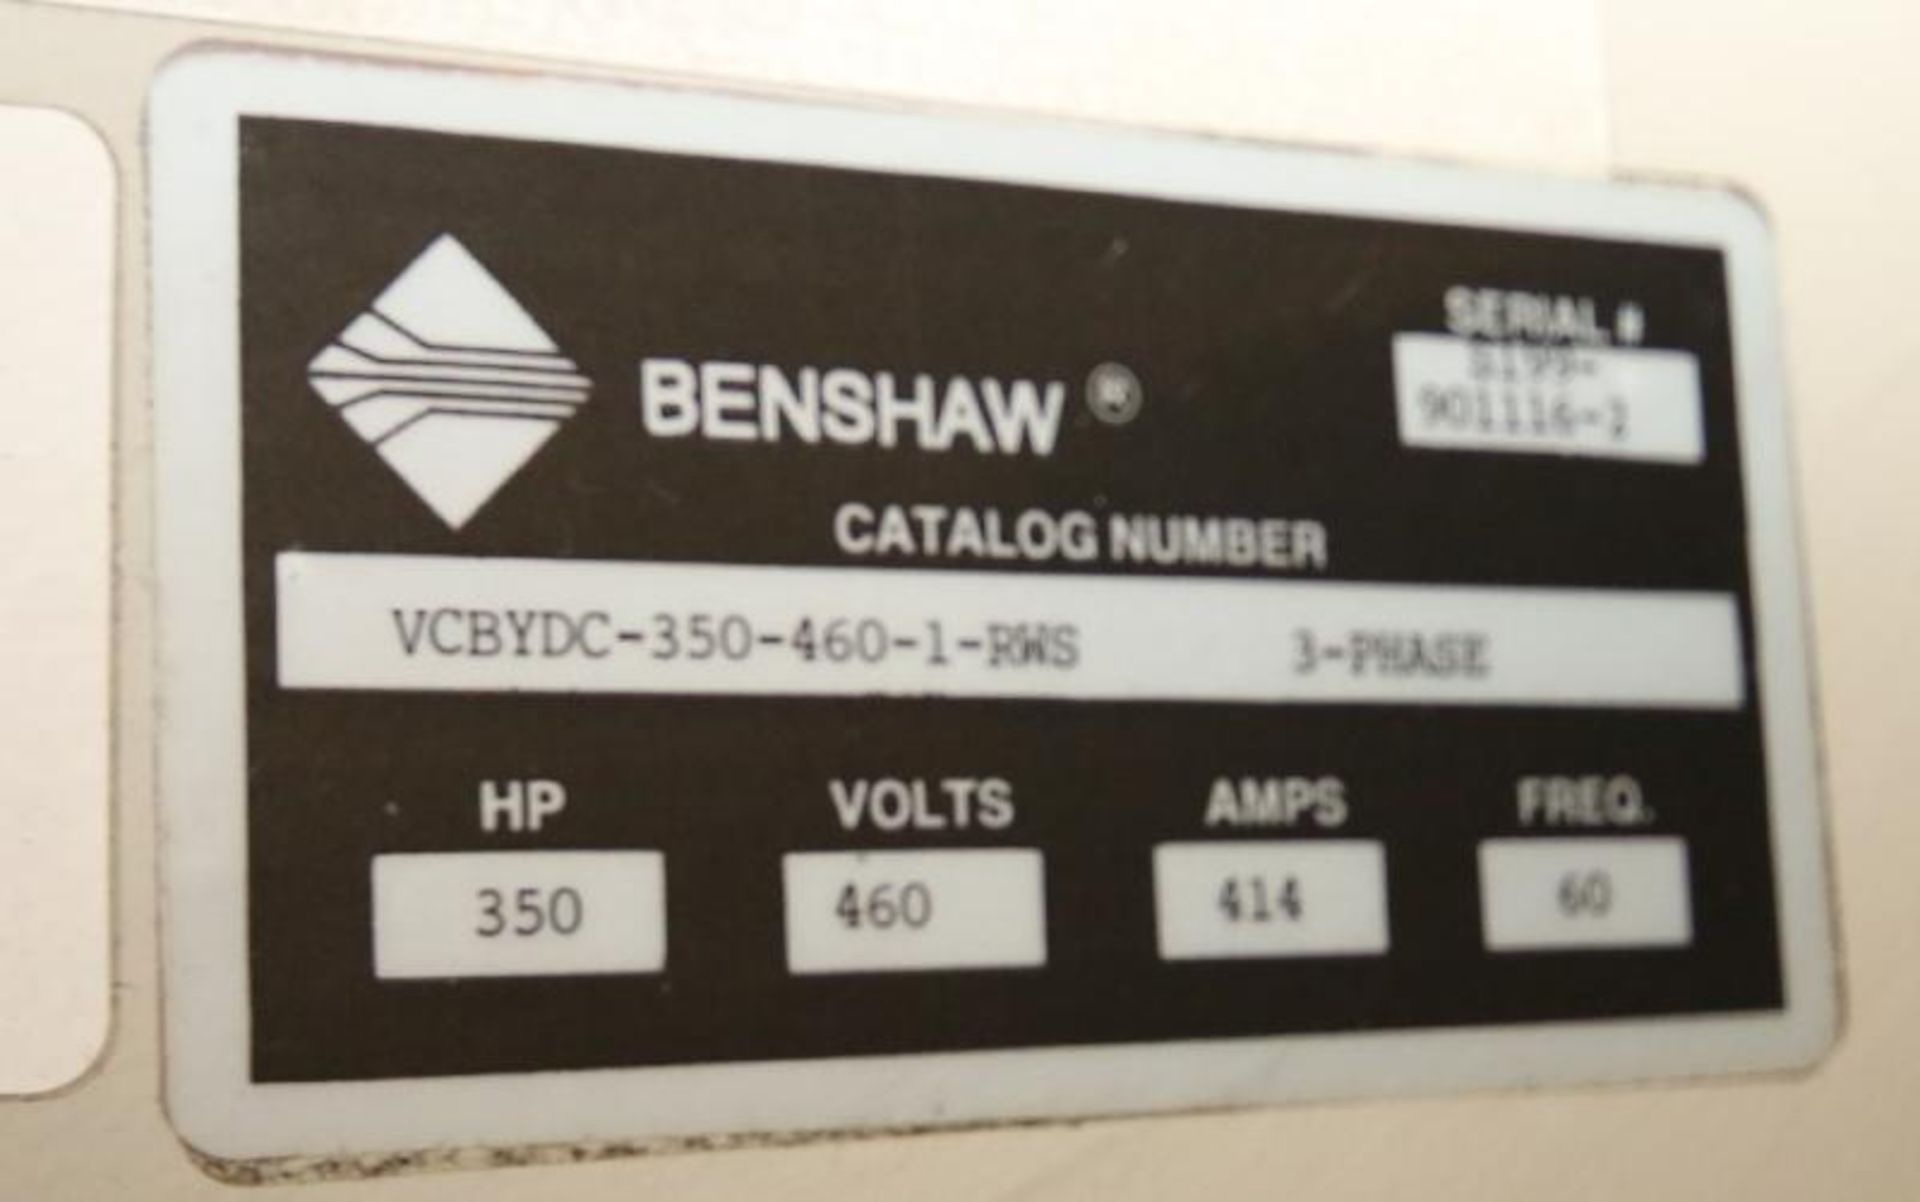 Benshaw 350 hp Ammonia Compressor Starter, Cat #VCBYDC-350-460-1-RWS, 460 V, 3 Phase with Cutler - Image 3 of 3